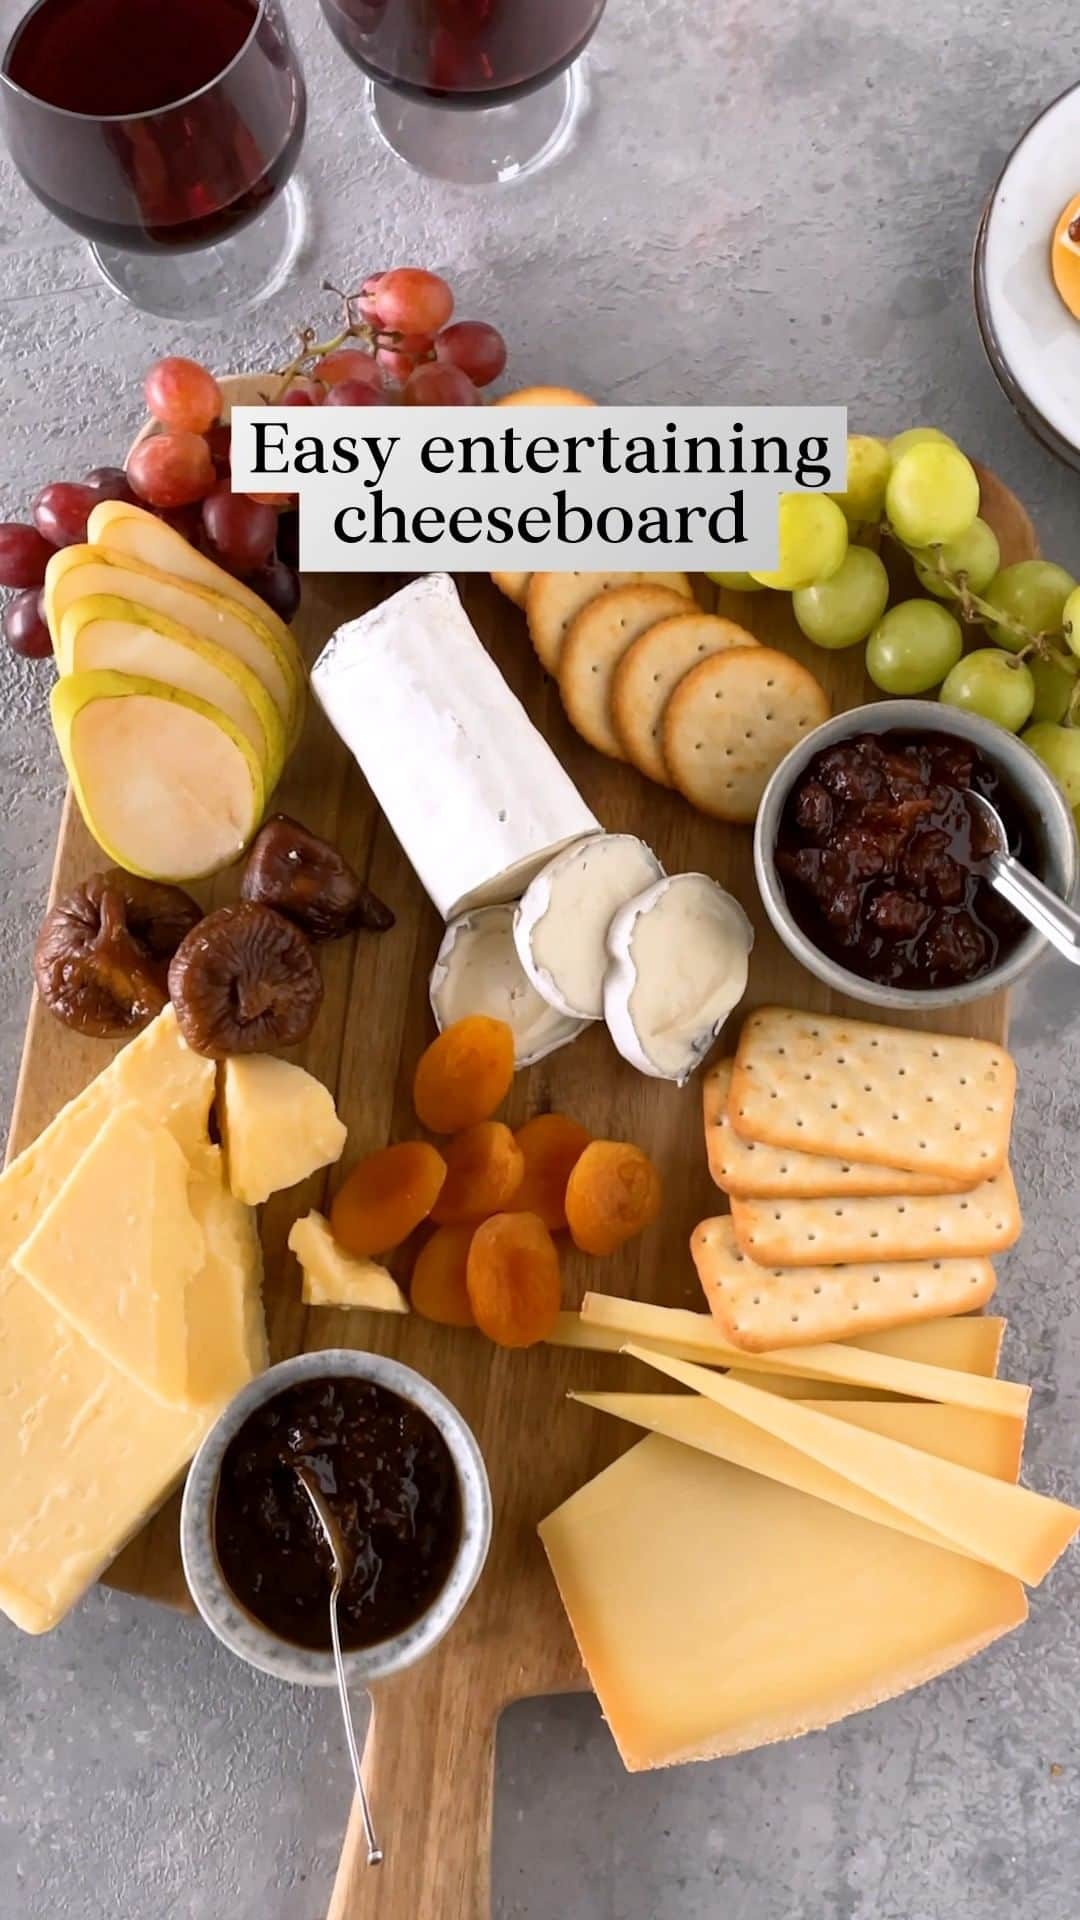 Tesco Food Officialのインスタグラム：「Cheese that’s guaranteed to please 🧀 Go overboard at your dinner party with a Tesco Finest cheese board. Tesco Finest Gruyere is expertly matured for full flavour and pairs perfectly with our Finest chutneys. Head to the link in bio to explore the range.  Drinkaware.co.uk +18」